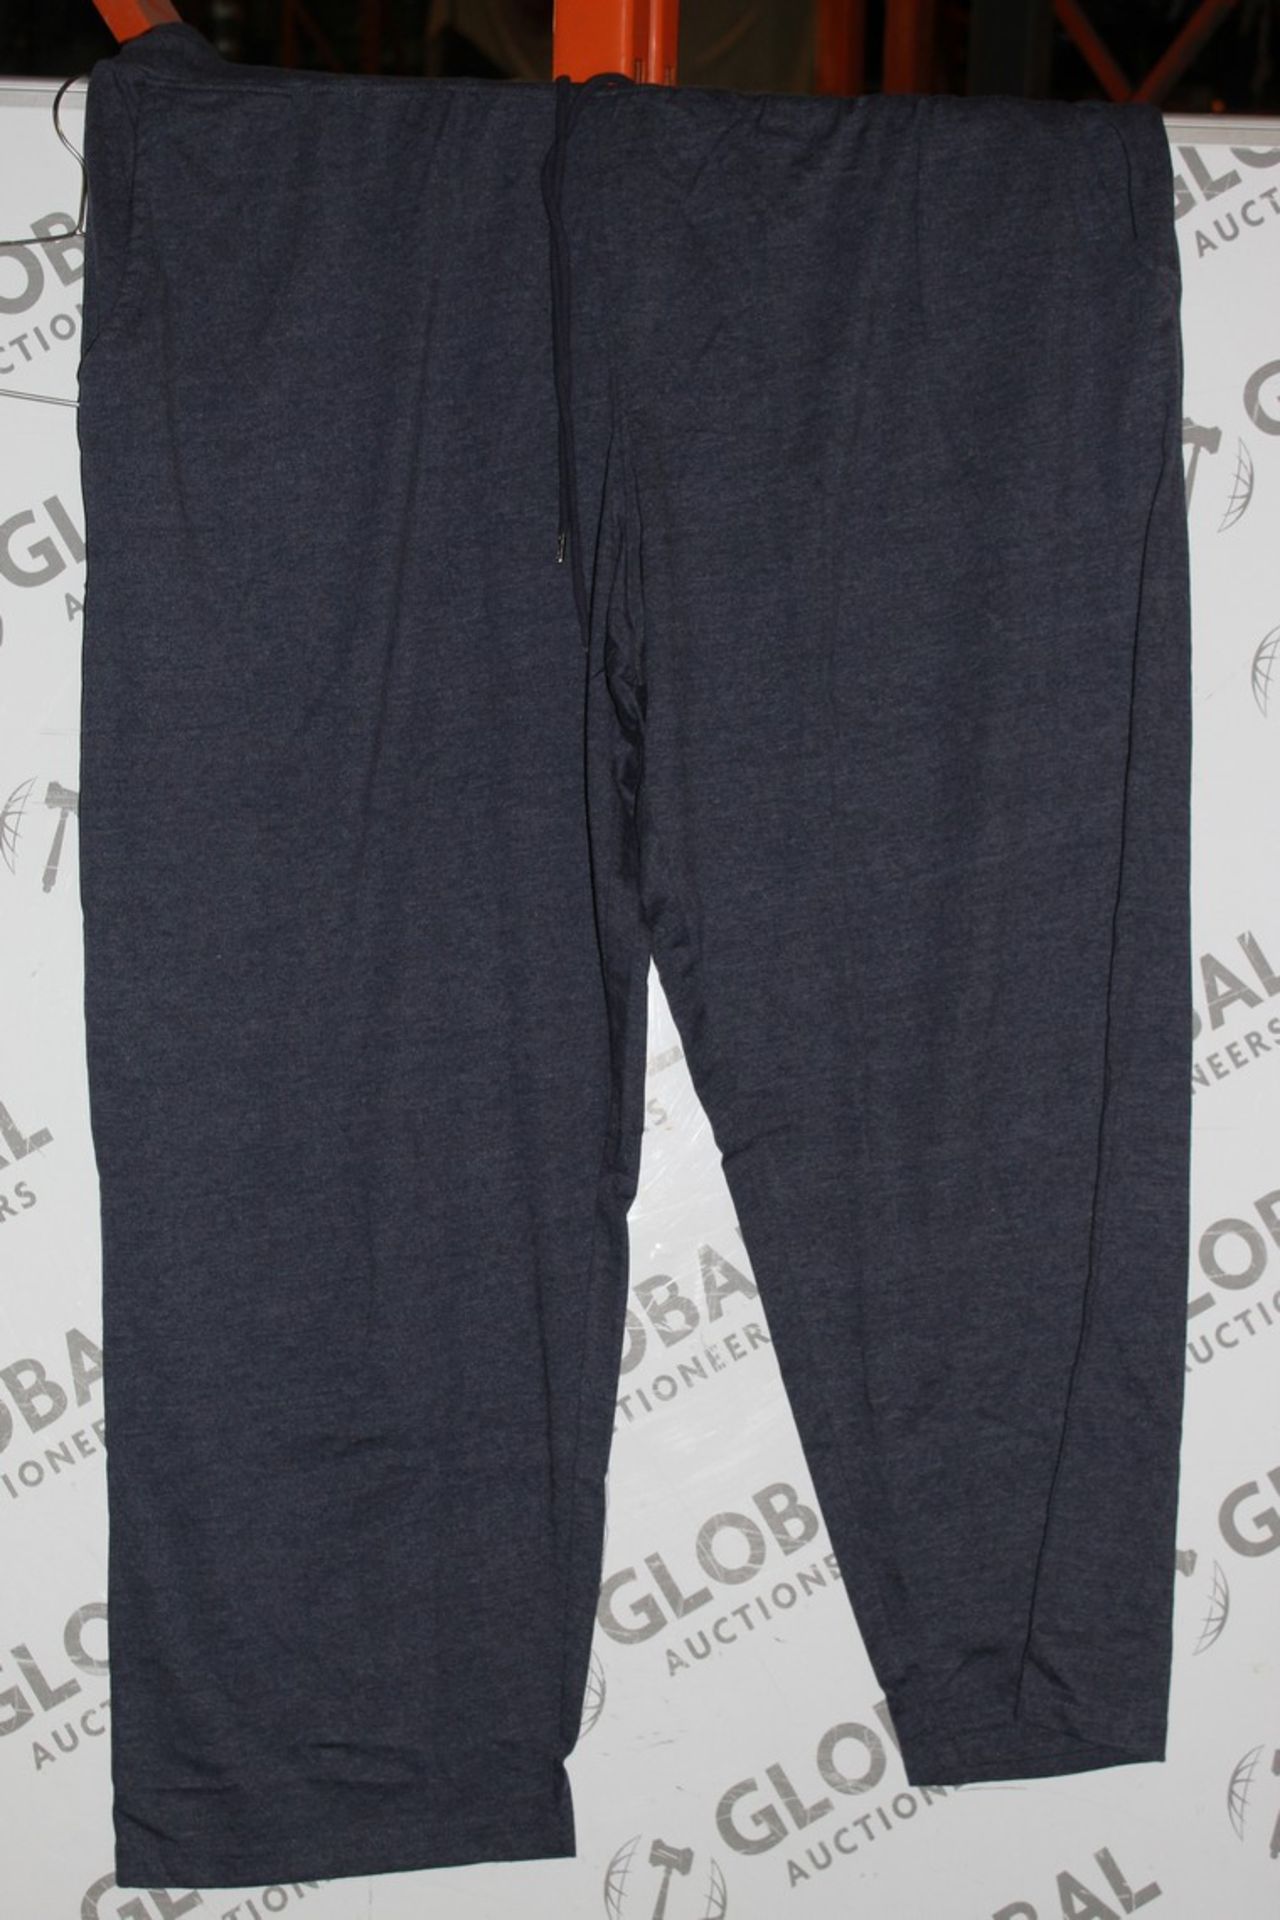 Lot to Contain 20 Brand New Twin Pack Navy and Charcoal Lounging Pants in Assorted Sizes RRP £25.